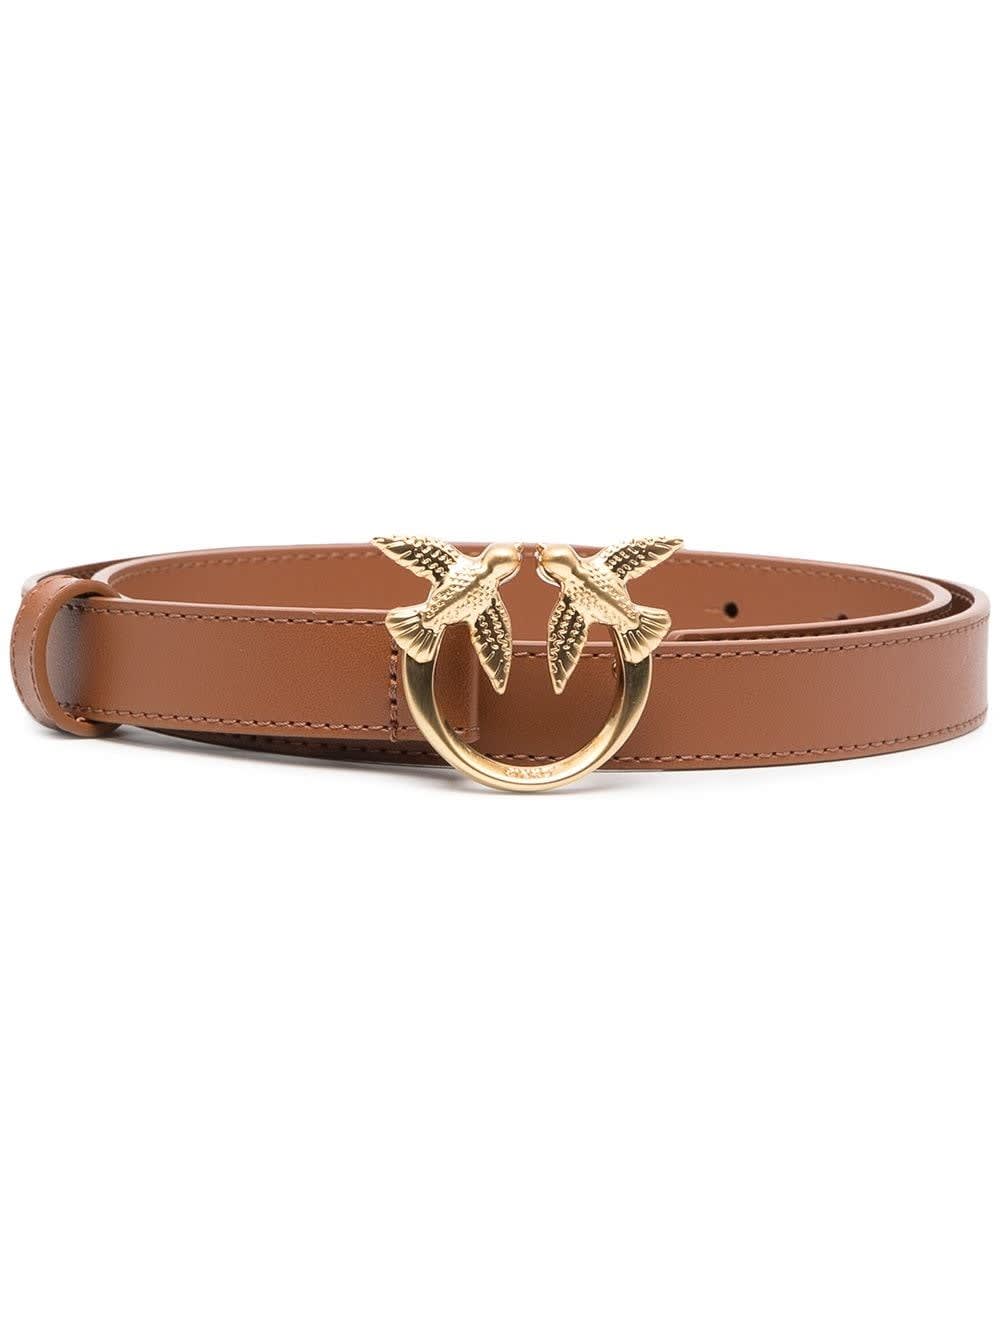 Pinko Love Berry Belt In Brown Leather With Logoed Buckle